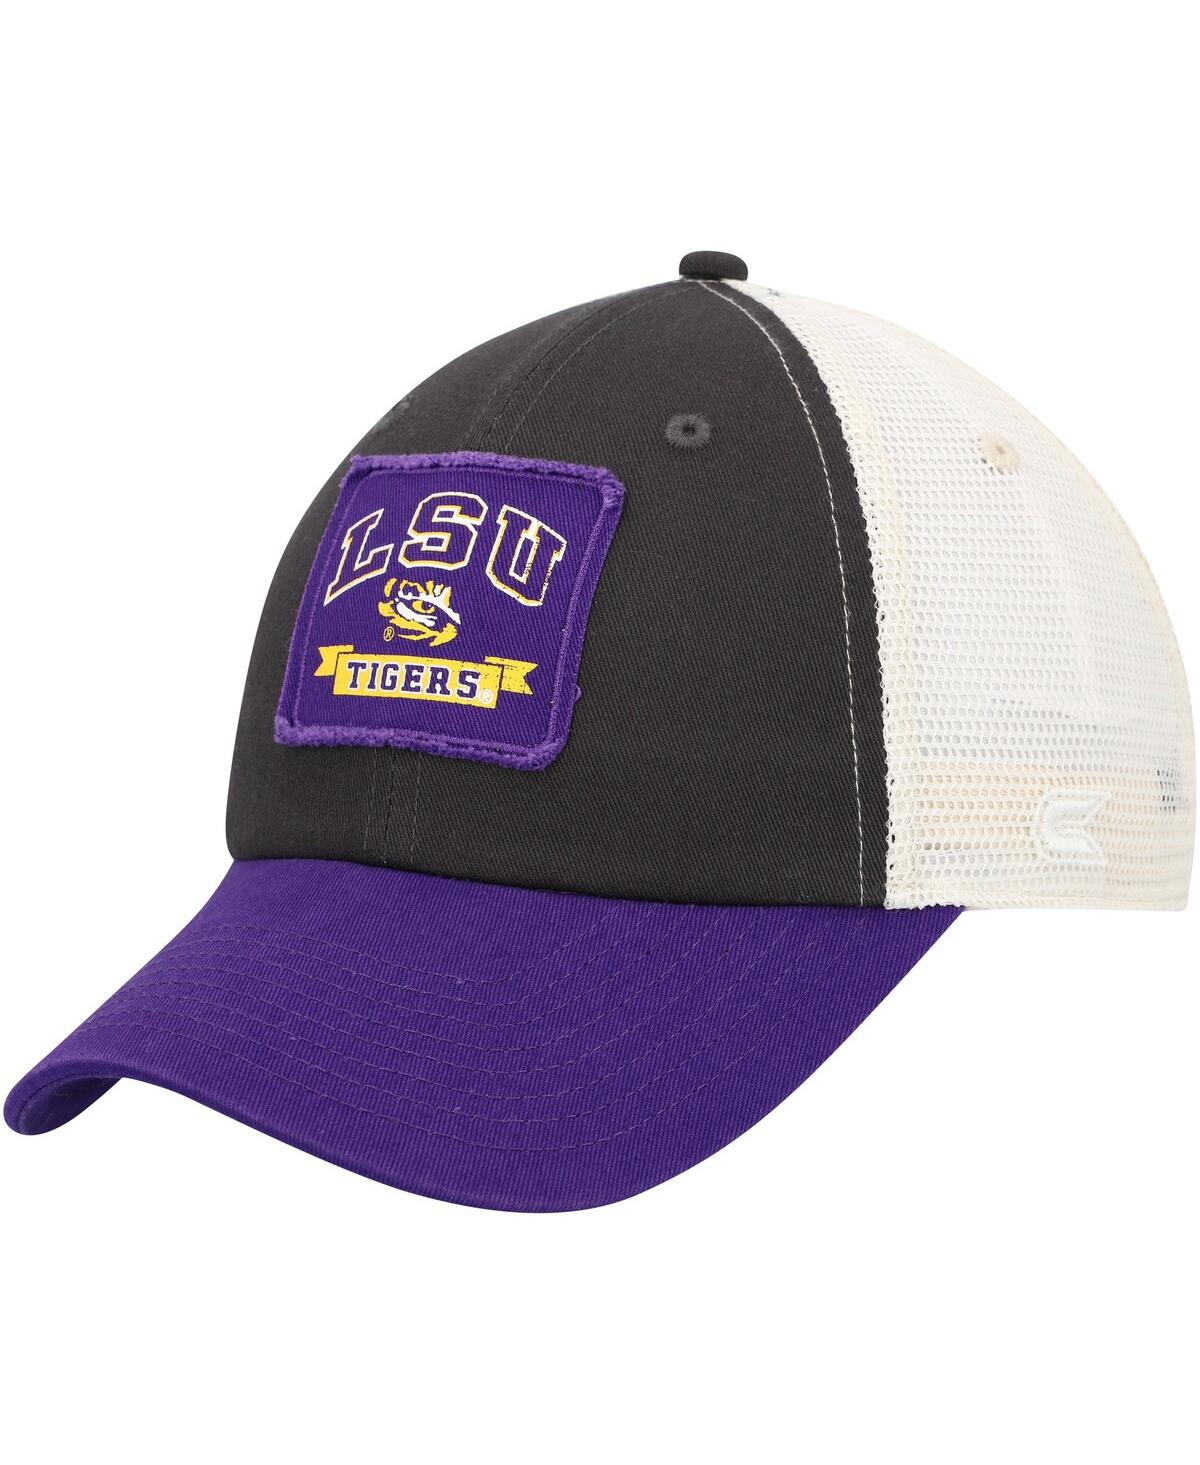 Colosseum Men's  Charcoal Lsu Tigers Objection Snapback Hat